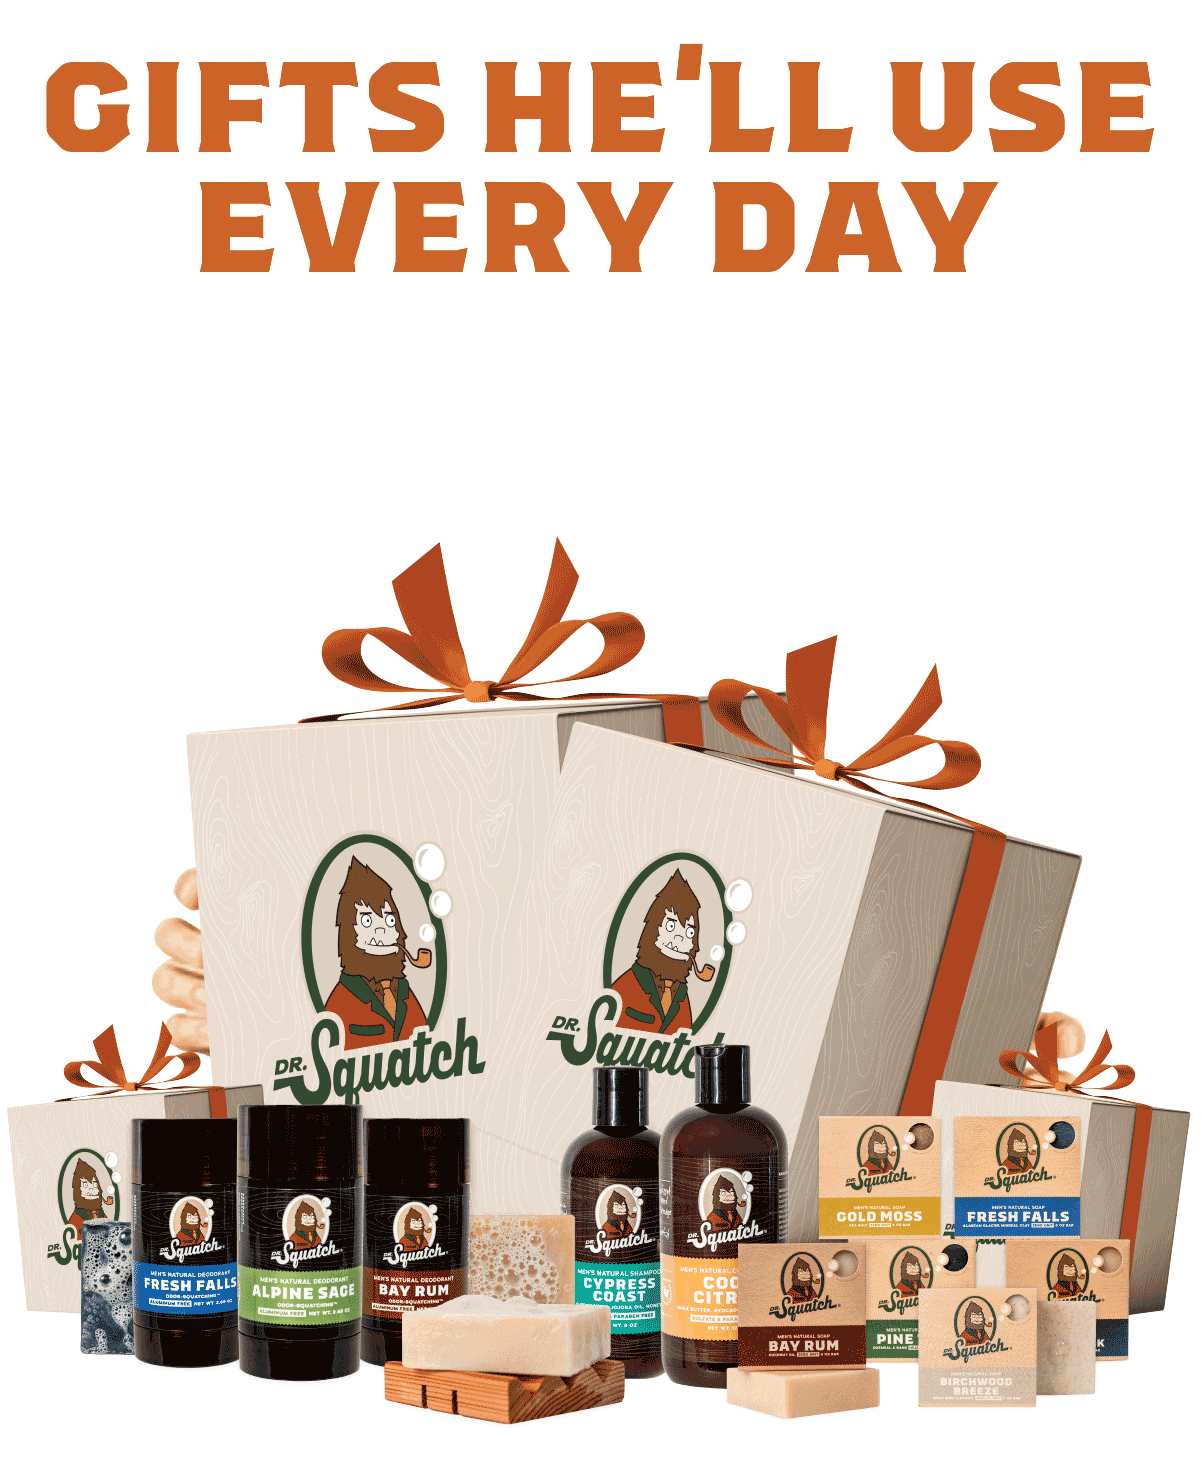 Dr. Squatch Father's Day Bundles Are Gifts That Dads Can Use Every Day! -  Hello Subscription